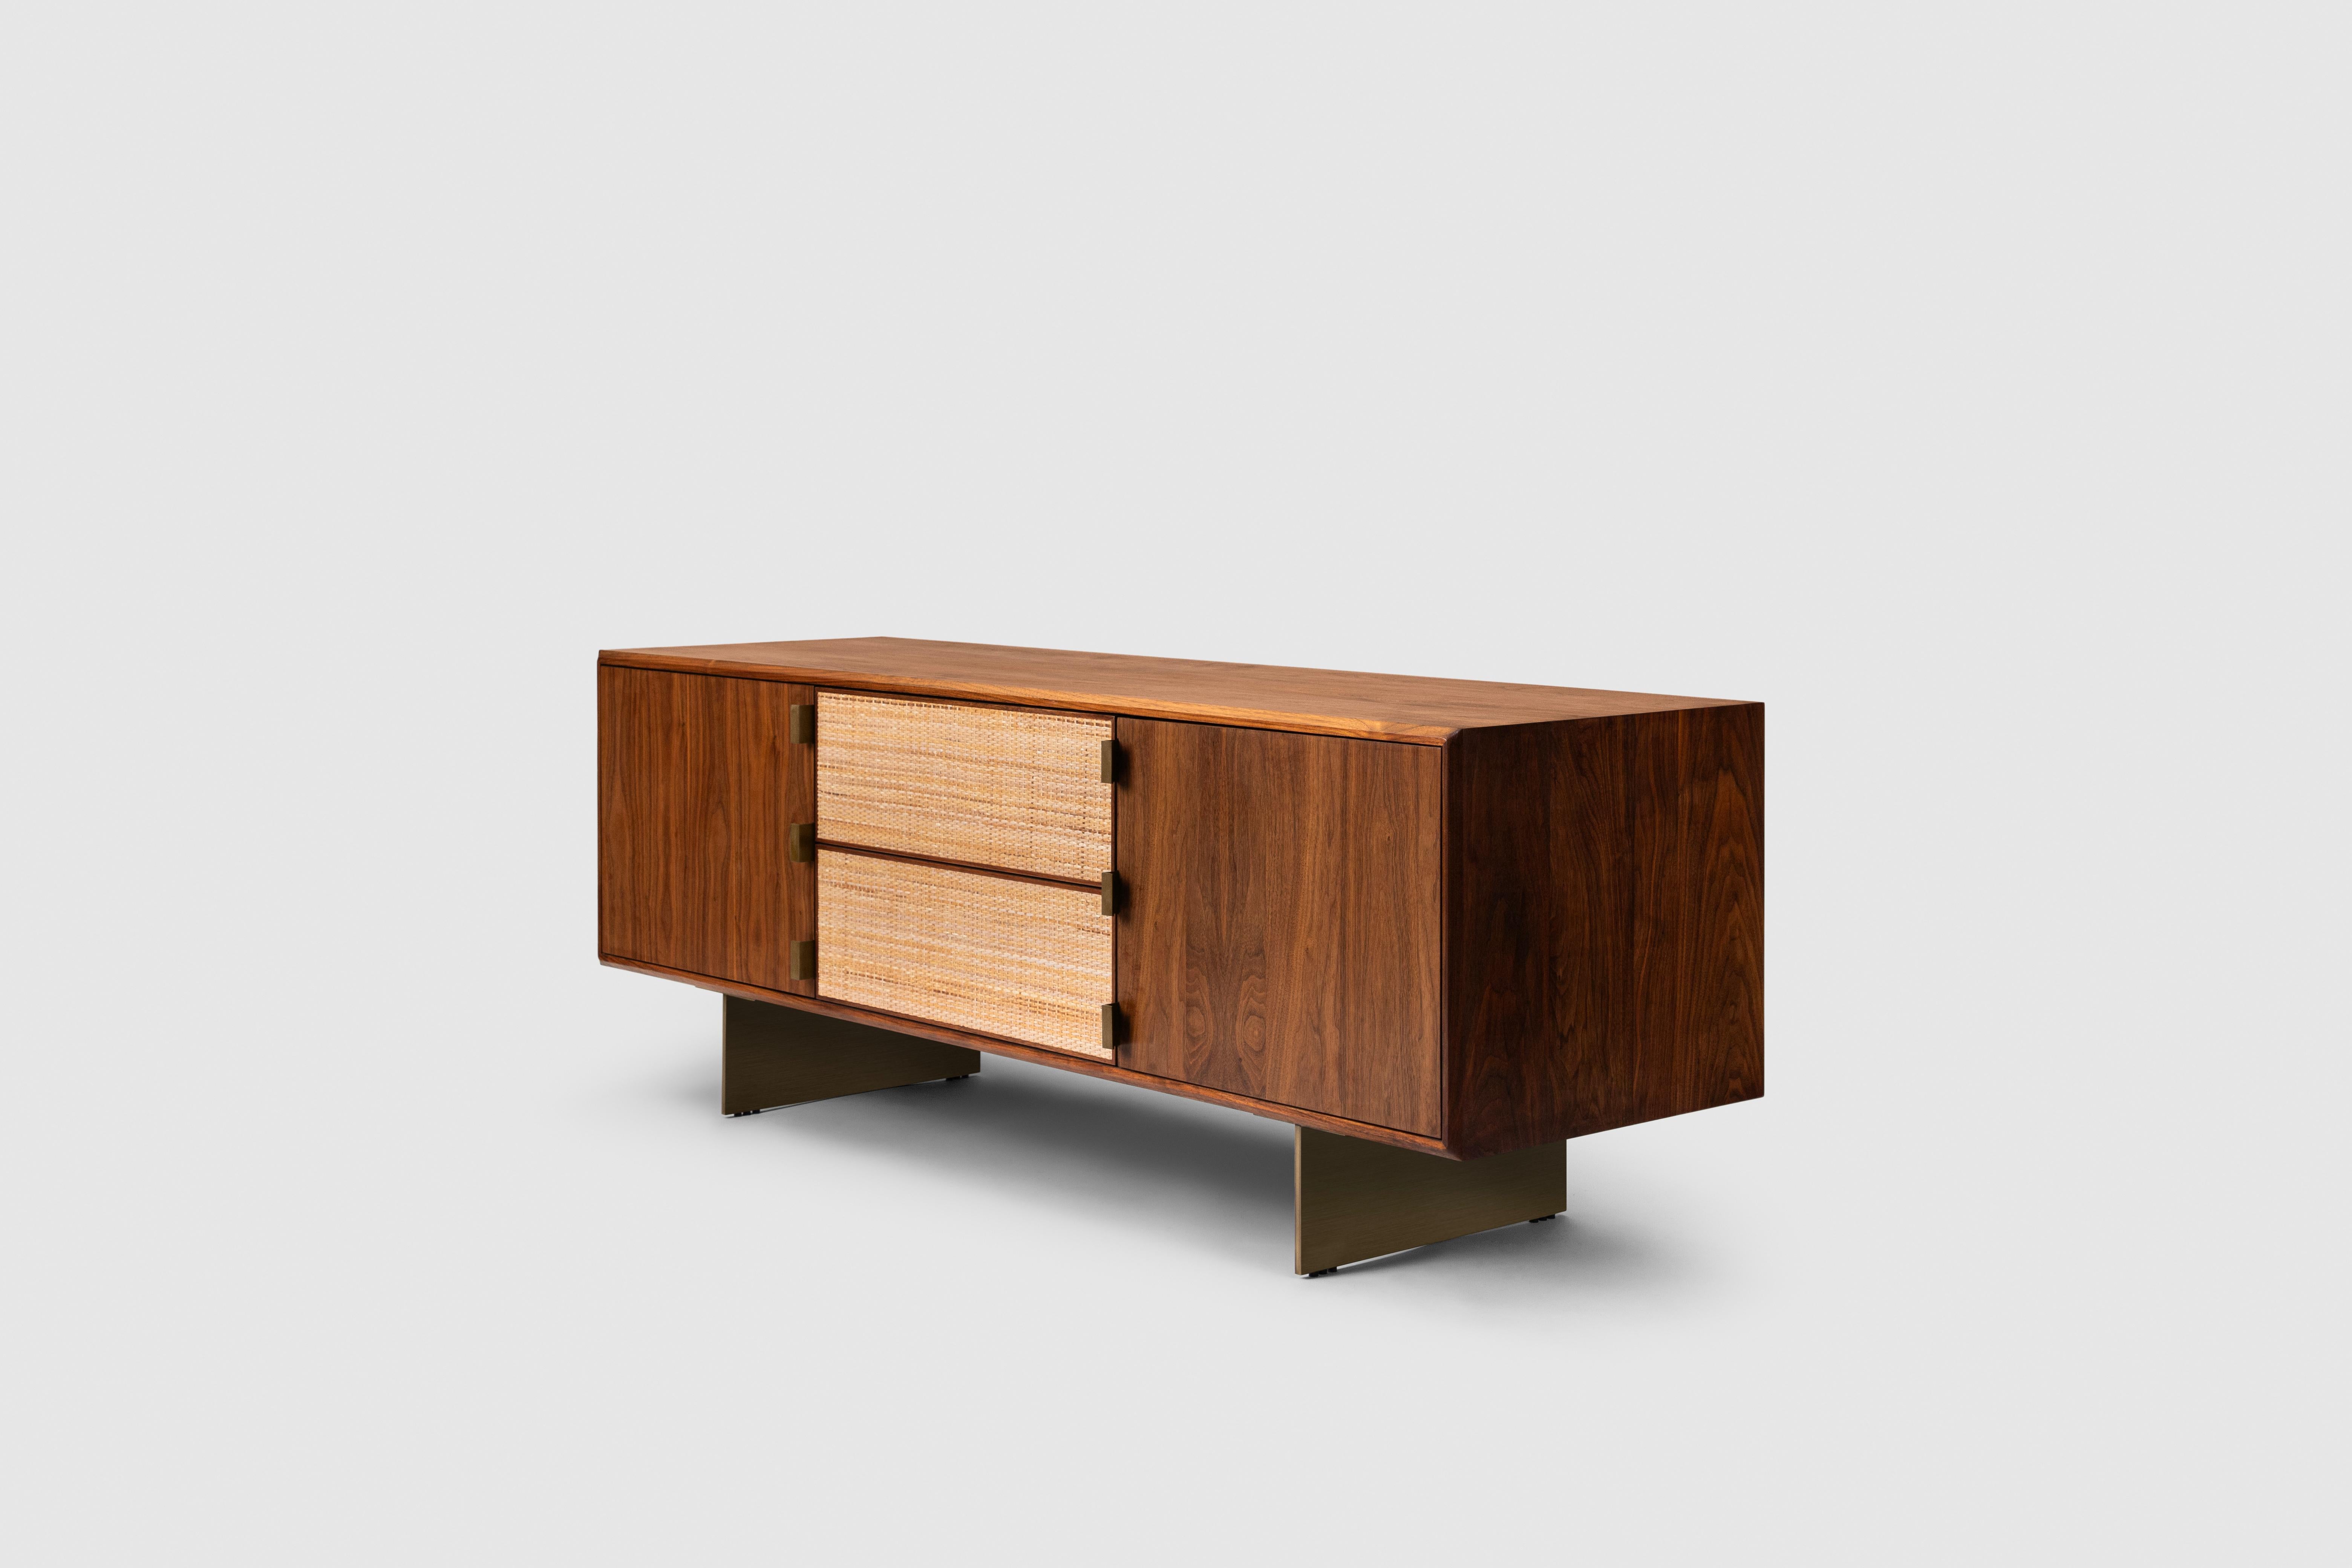 Our bestselling Augusto credenza series is the work of Luteca’s Design Director, Jorge Arturo Ibarra. A beautifully handcrafted piece that takes inspiration from the brutalist concrete façade of the Biblioteca Central (Central Library) de la